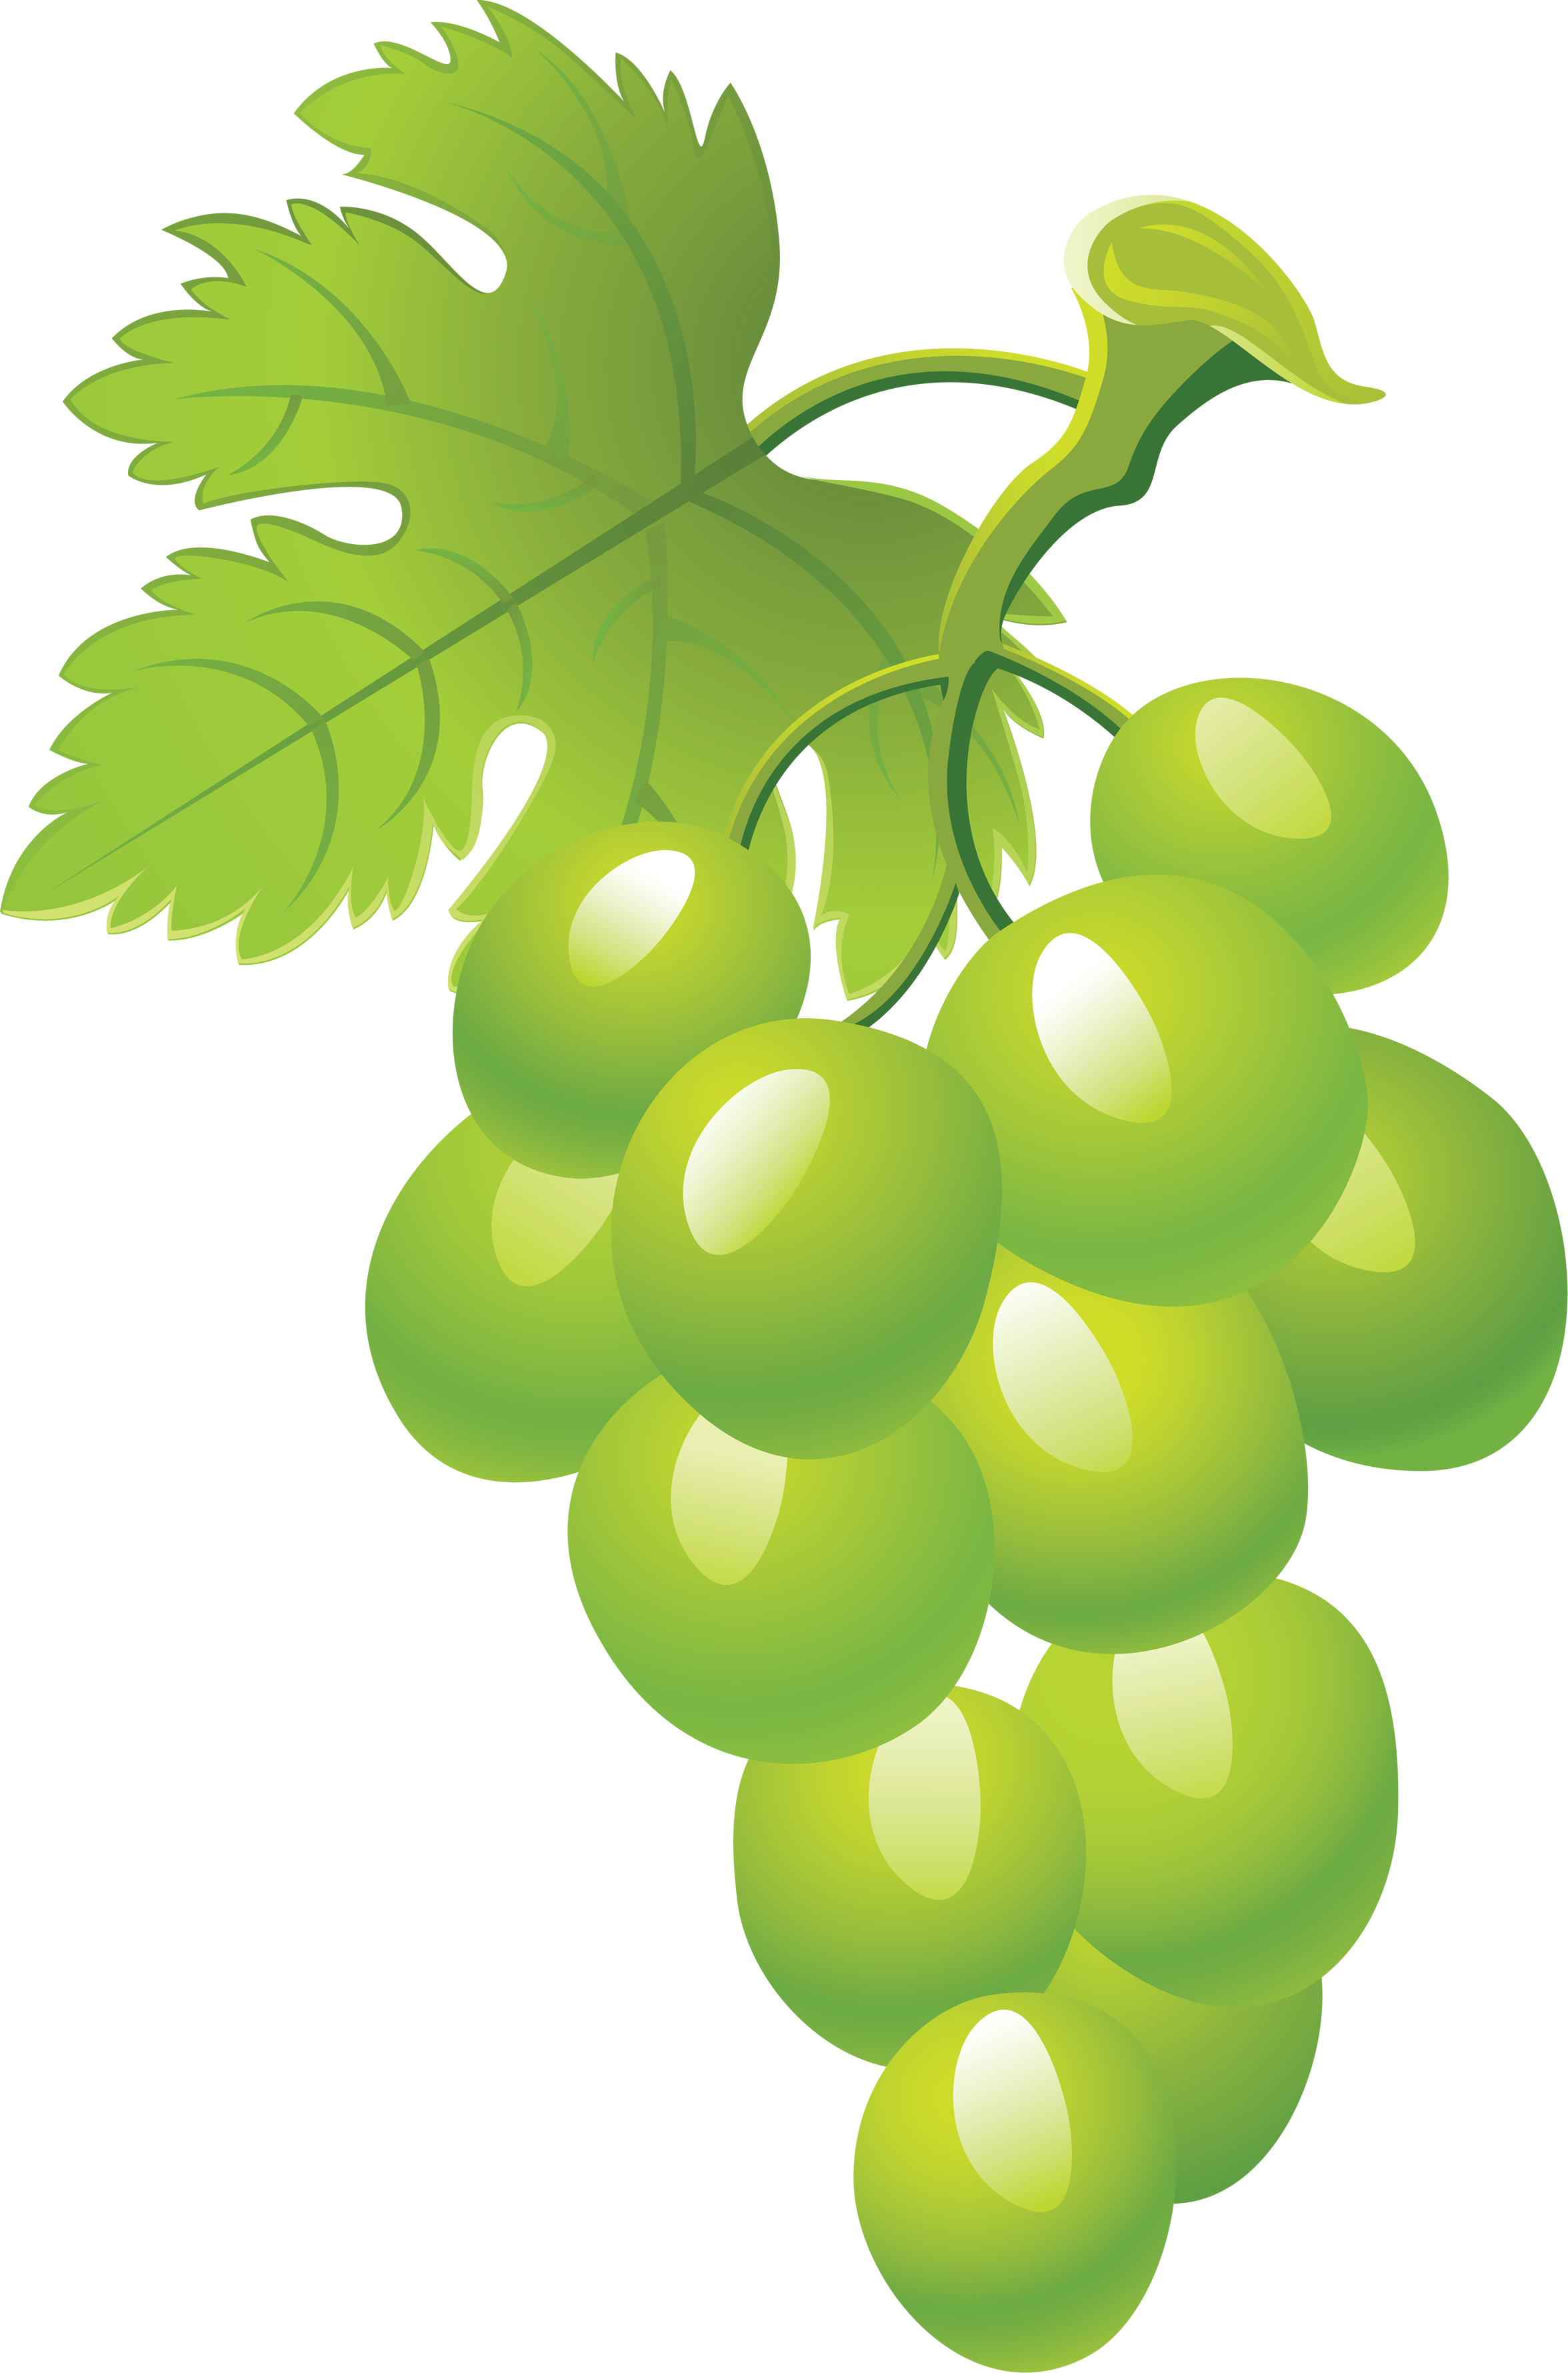 Grapes clipart high re, Grapes high re Transparent FREE for.